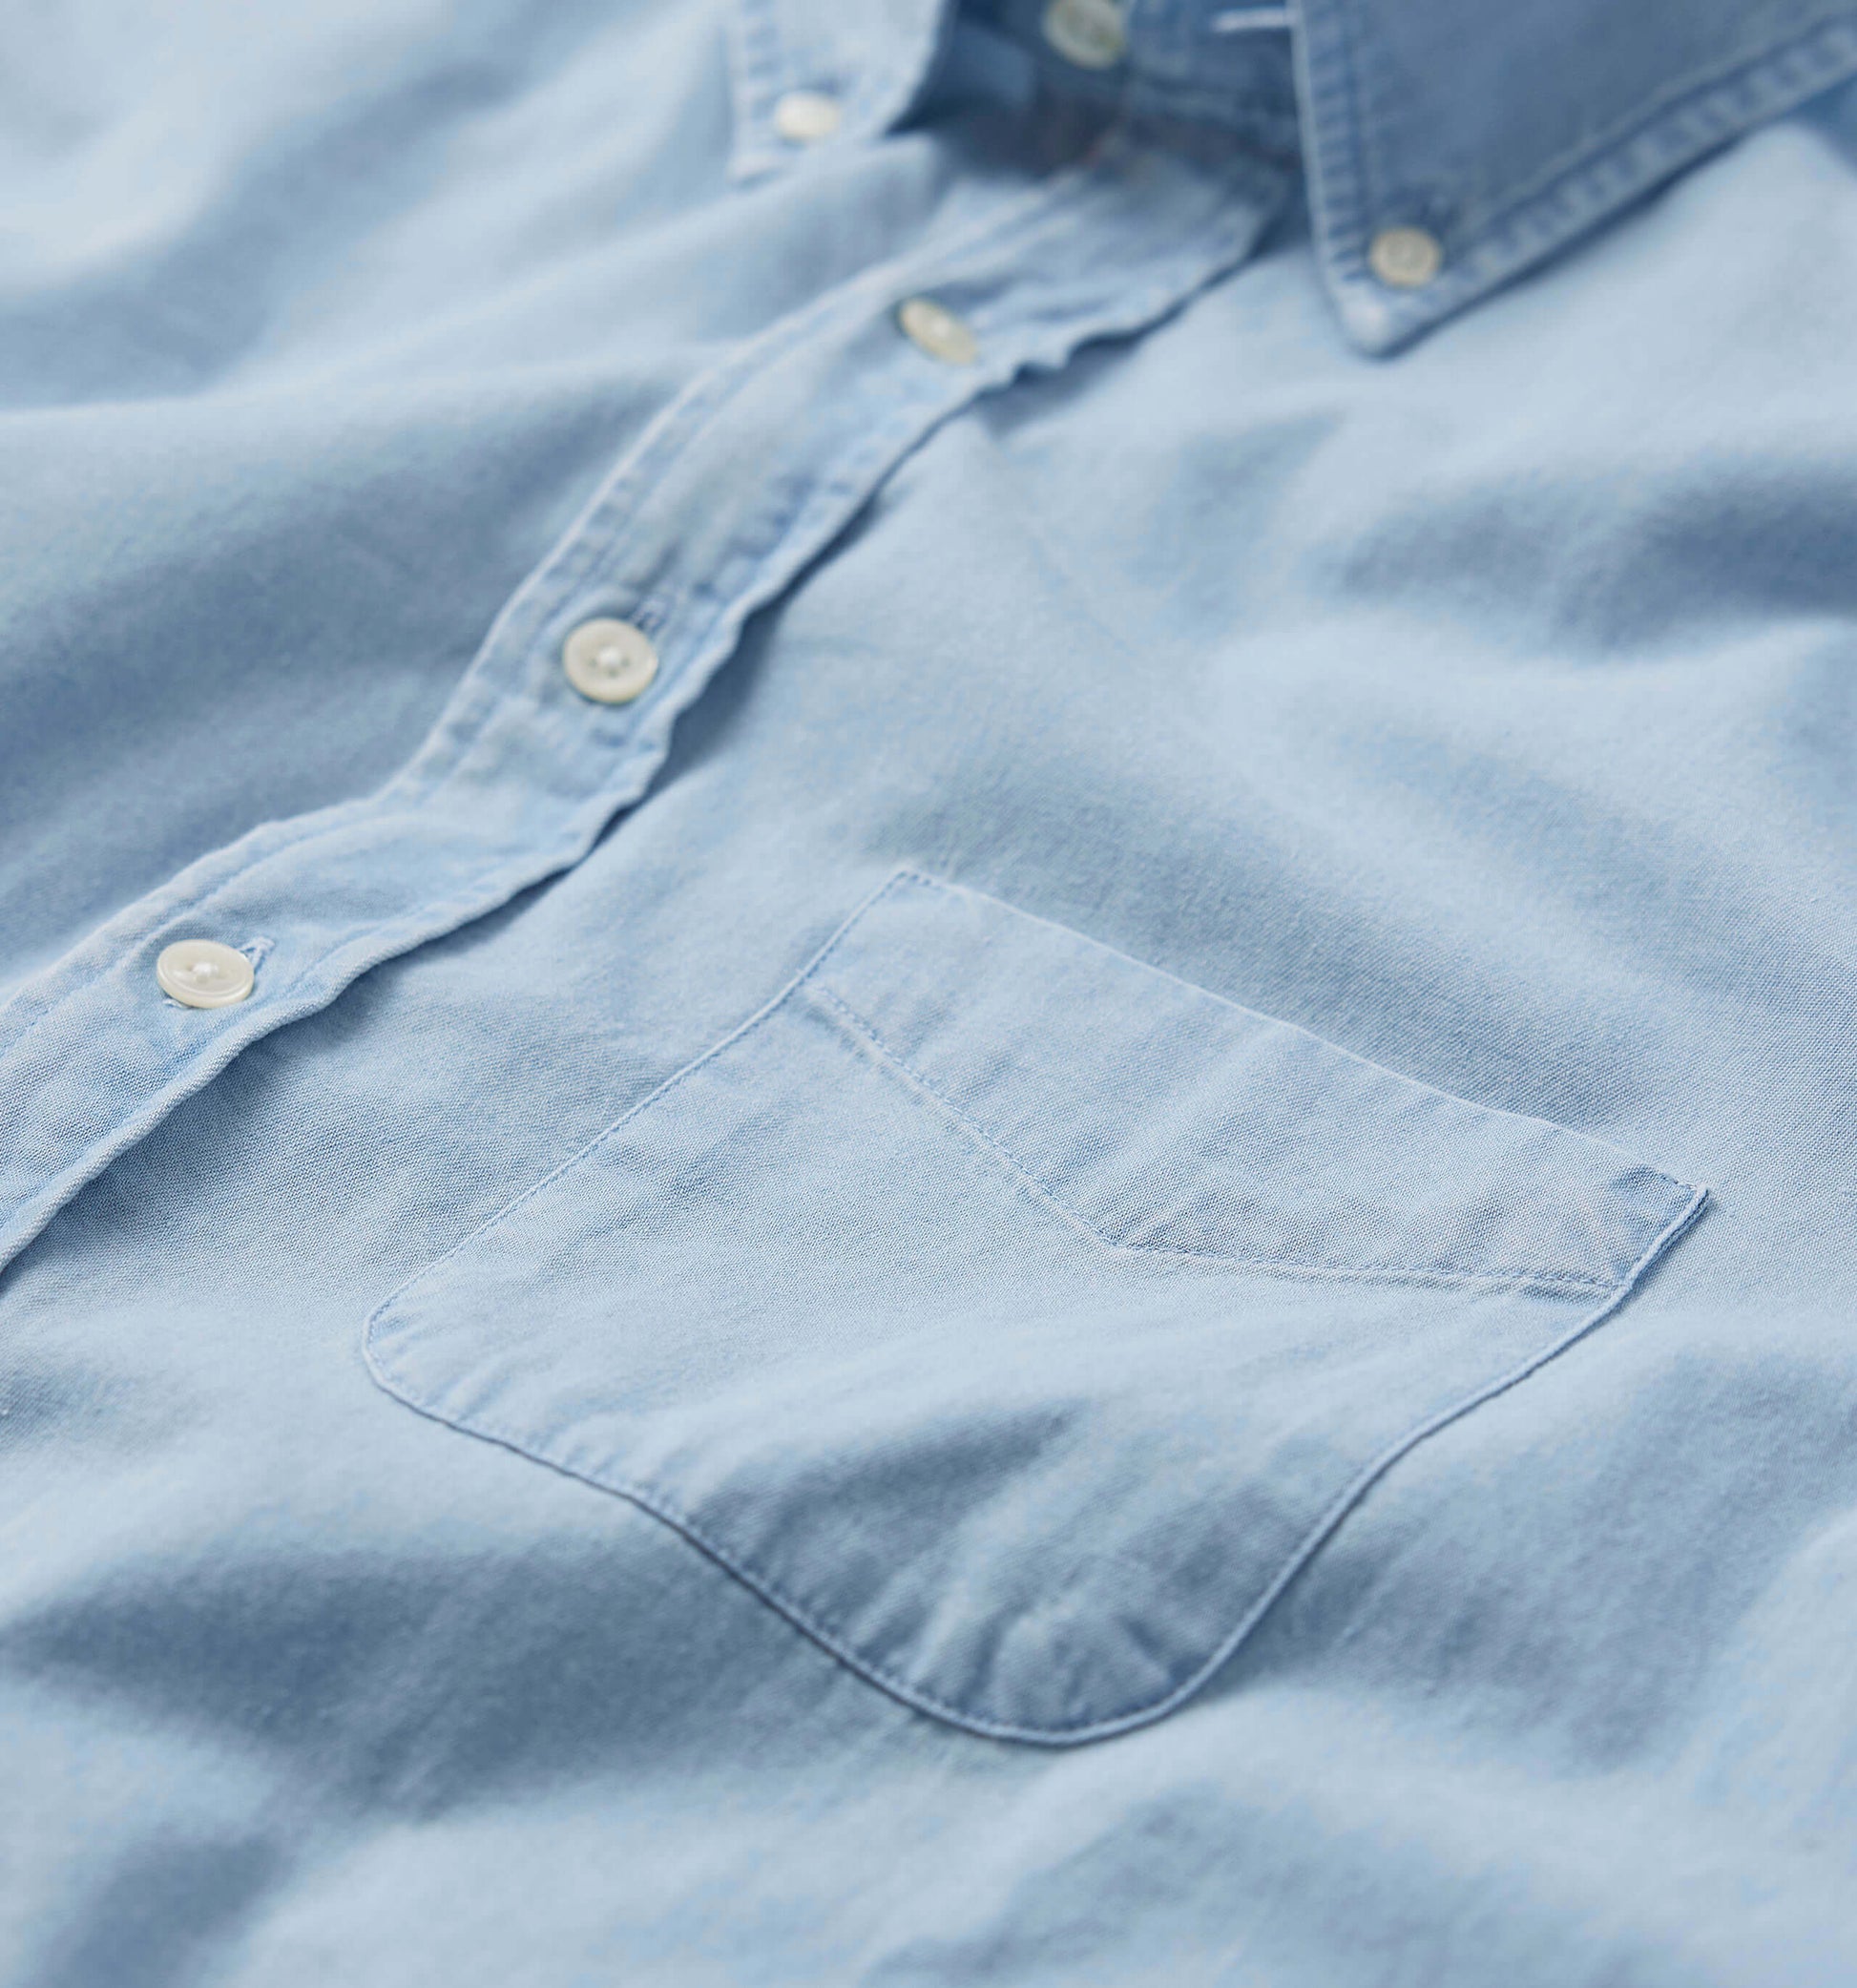 The Tommy - Button Down Denim Shirt In Light Chambray From King Essentials